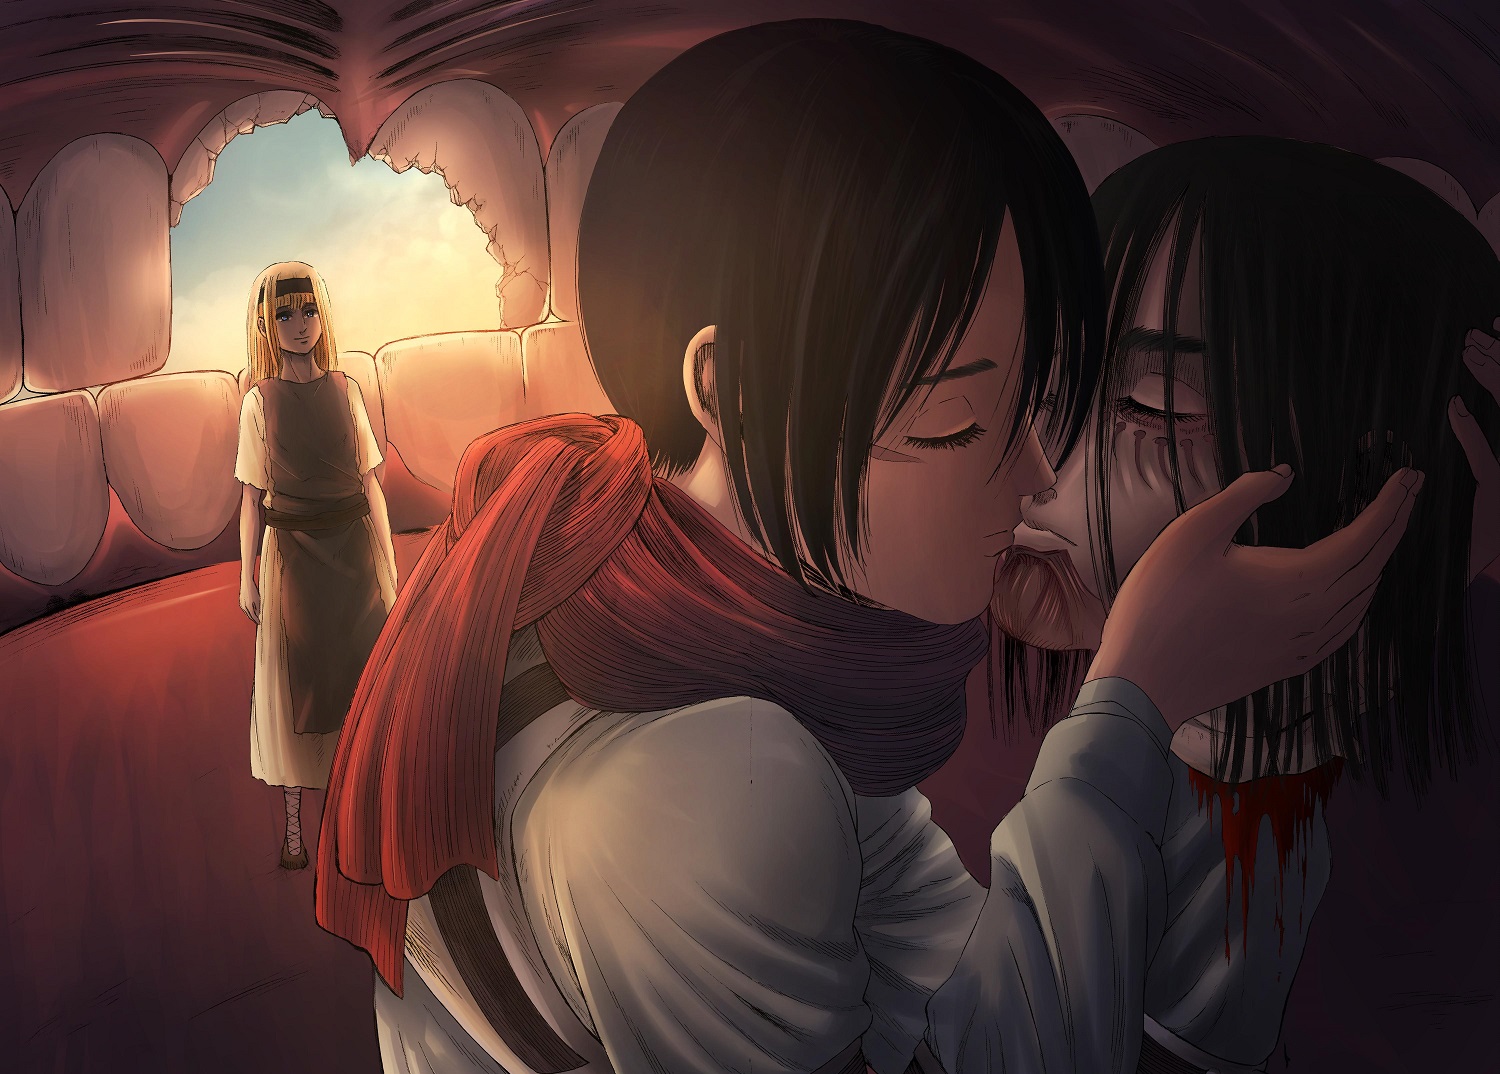 Mikasa kills Eren to stop the Rumbling in the final 'Attack on Titan' story arc